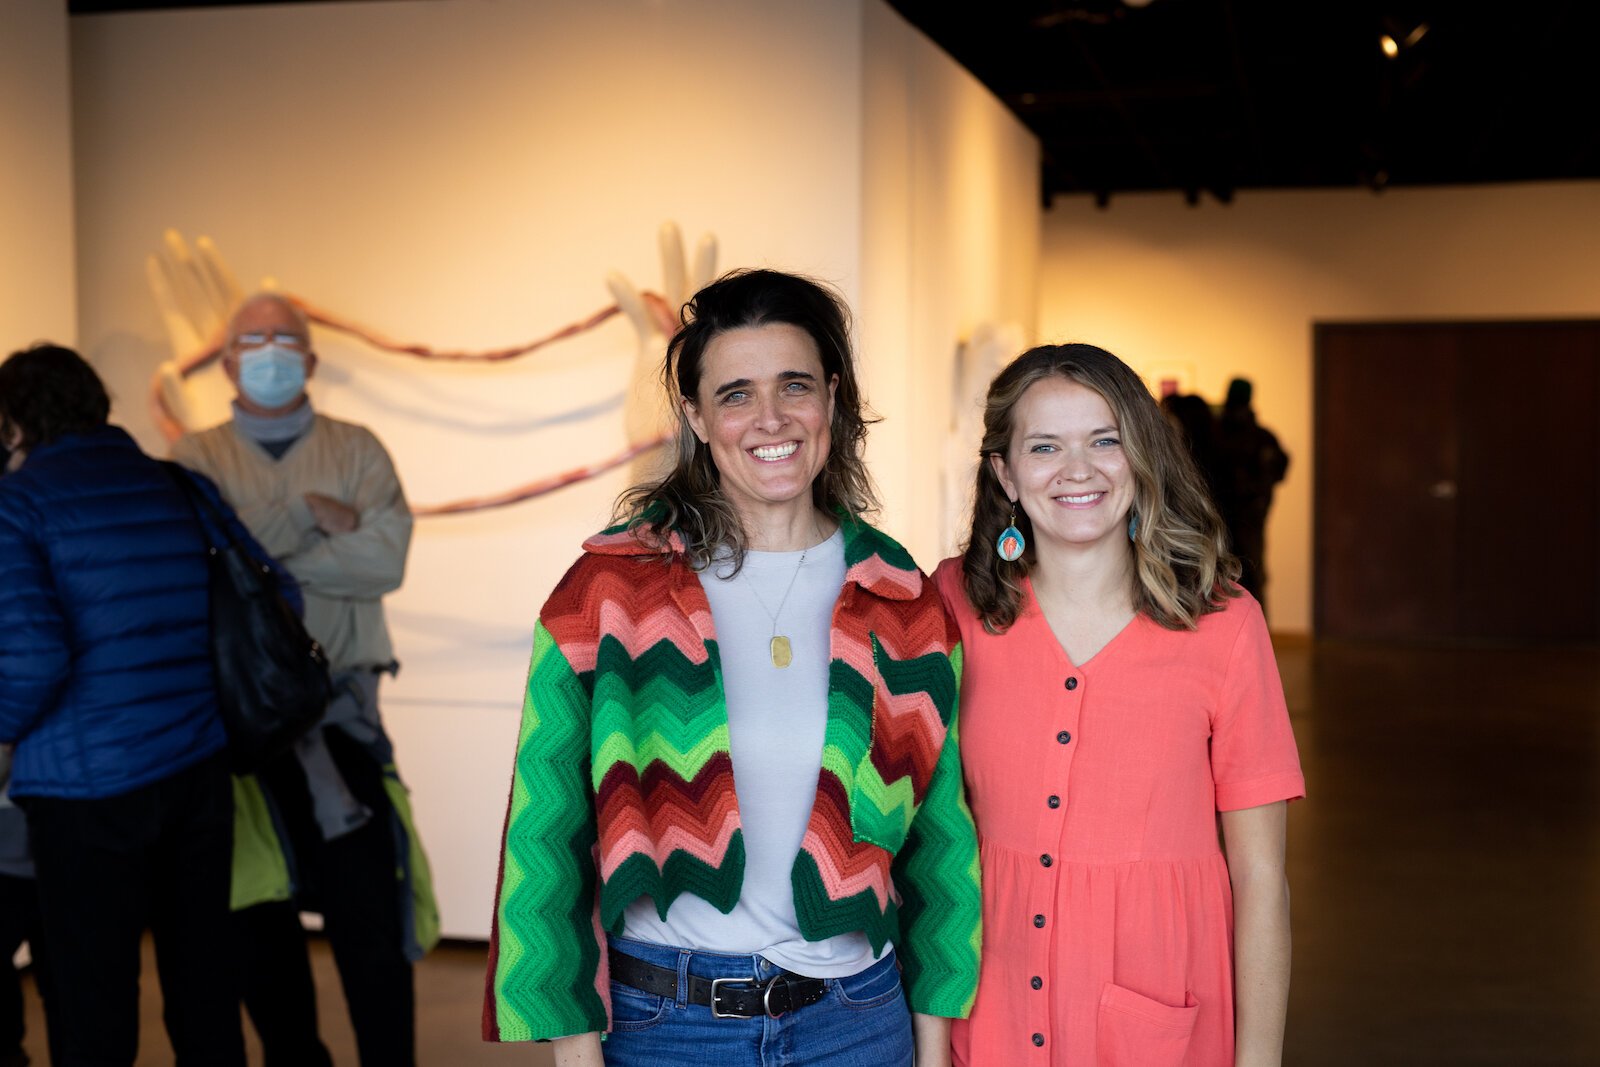 Artists Melanie Cooper Pennington and Kaylan Buteyn at a panel discussion about the Painting At Night show hosted by Artlink.